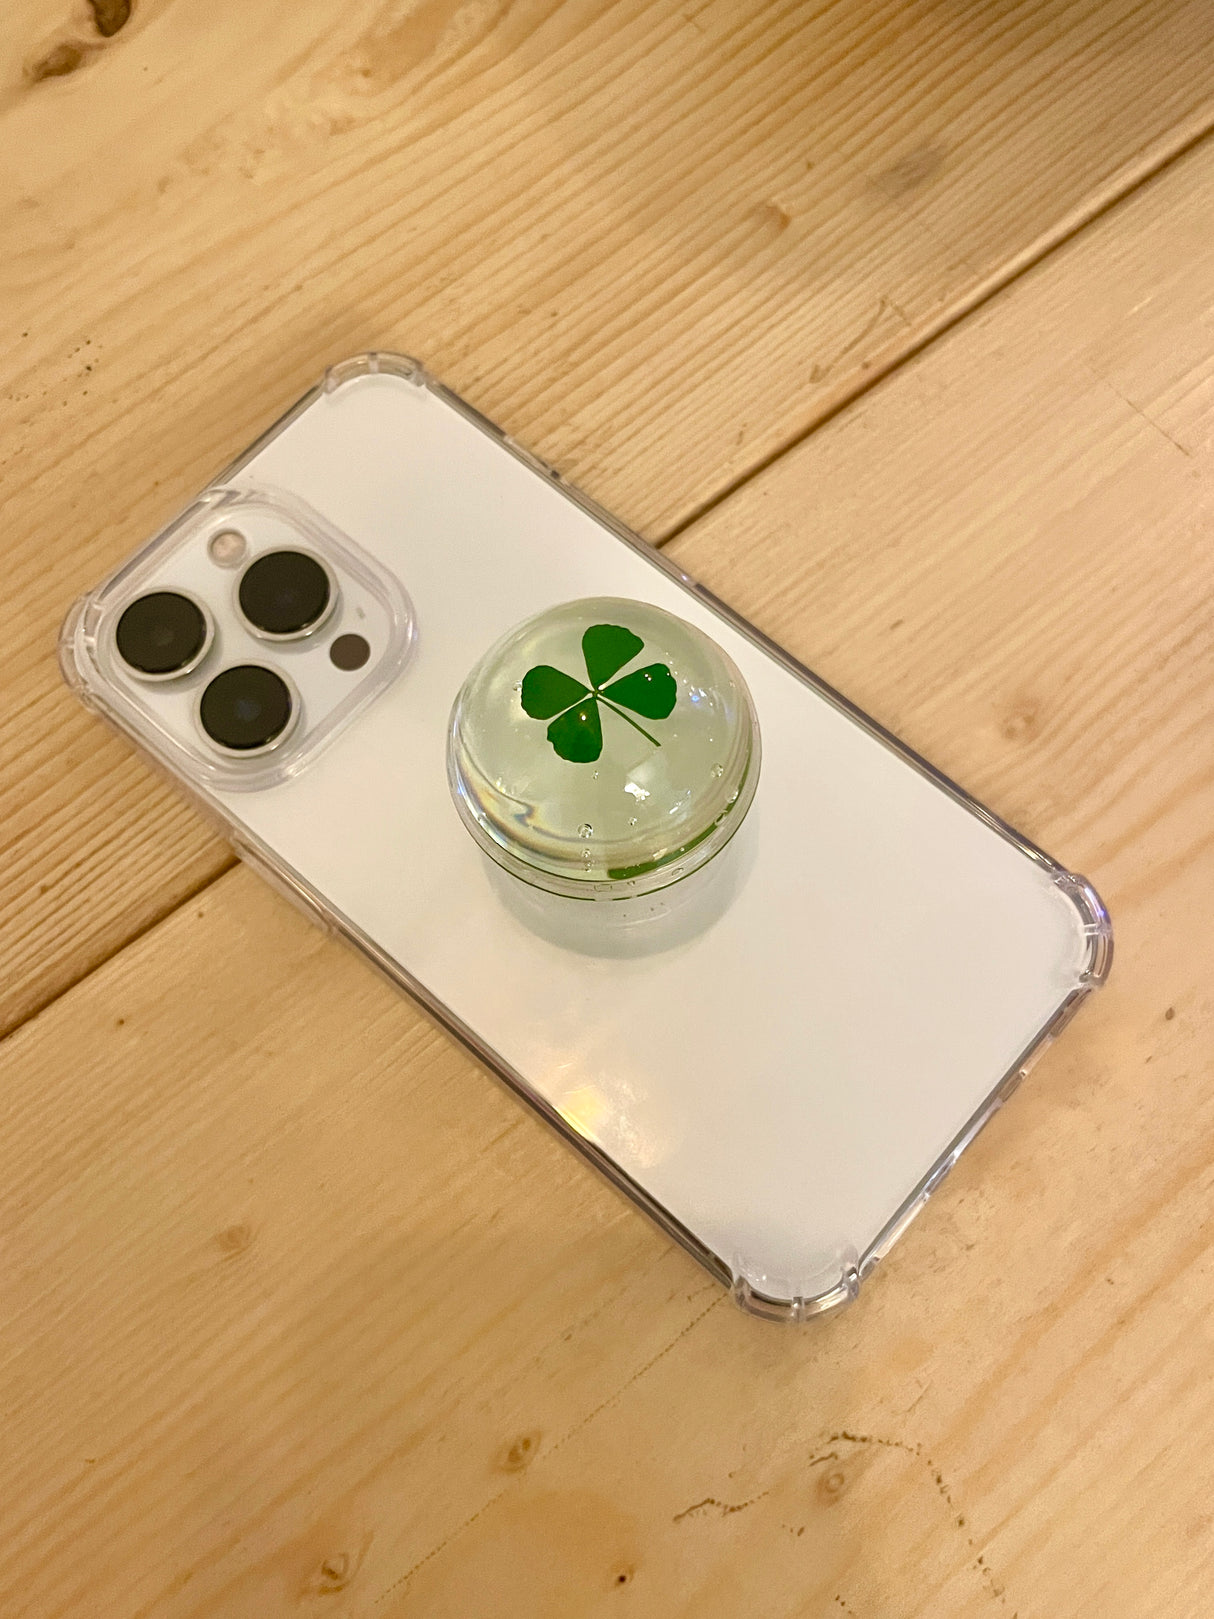 Handcrafted A four-leaf clover Smart grip